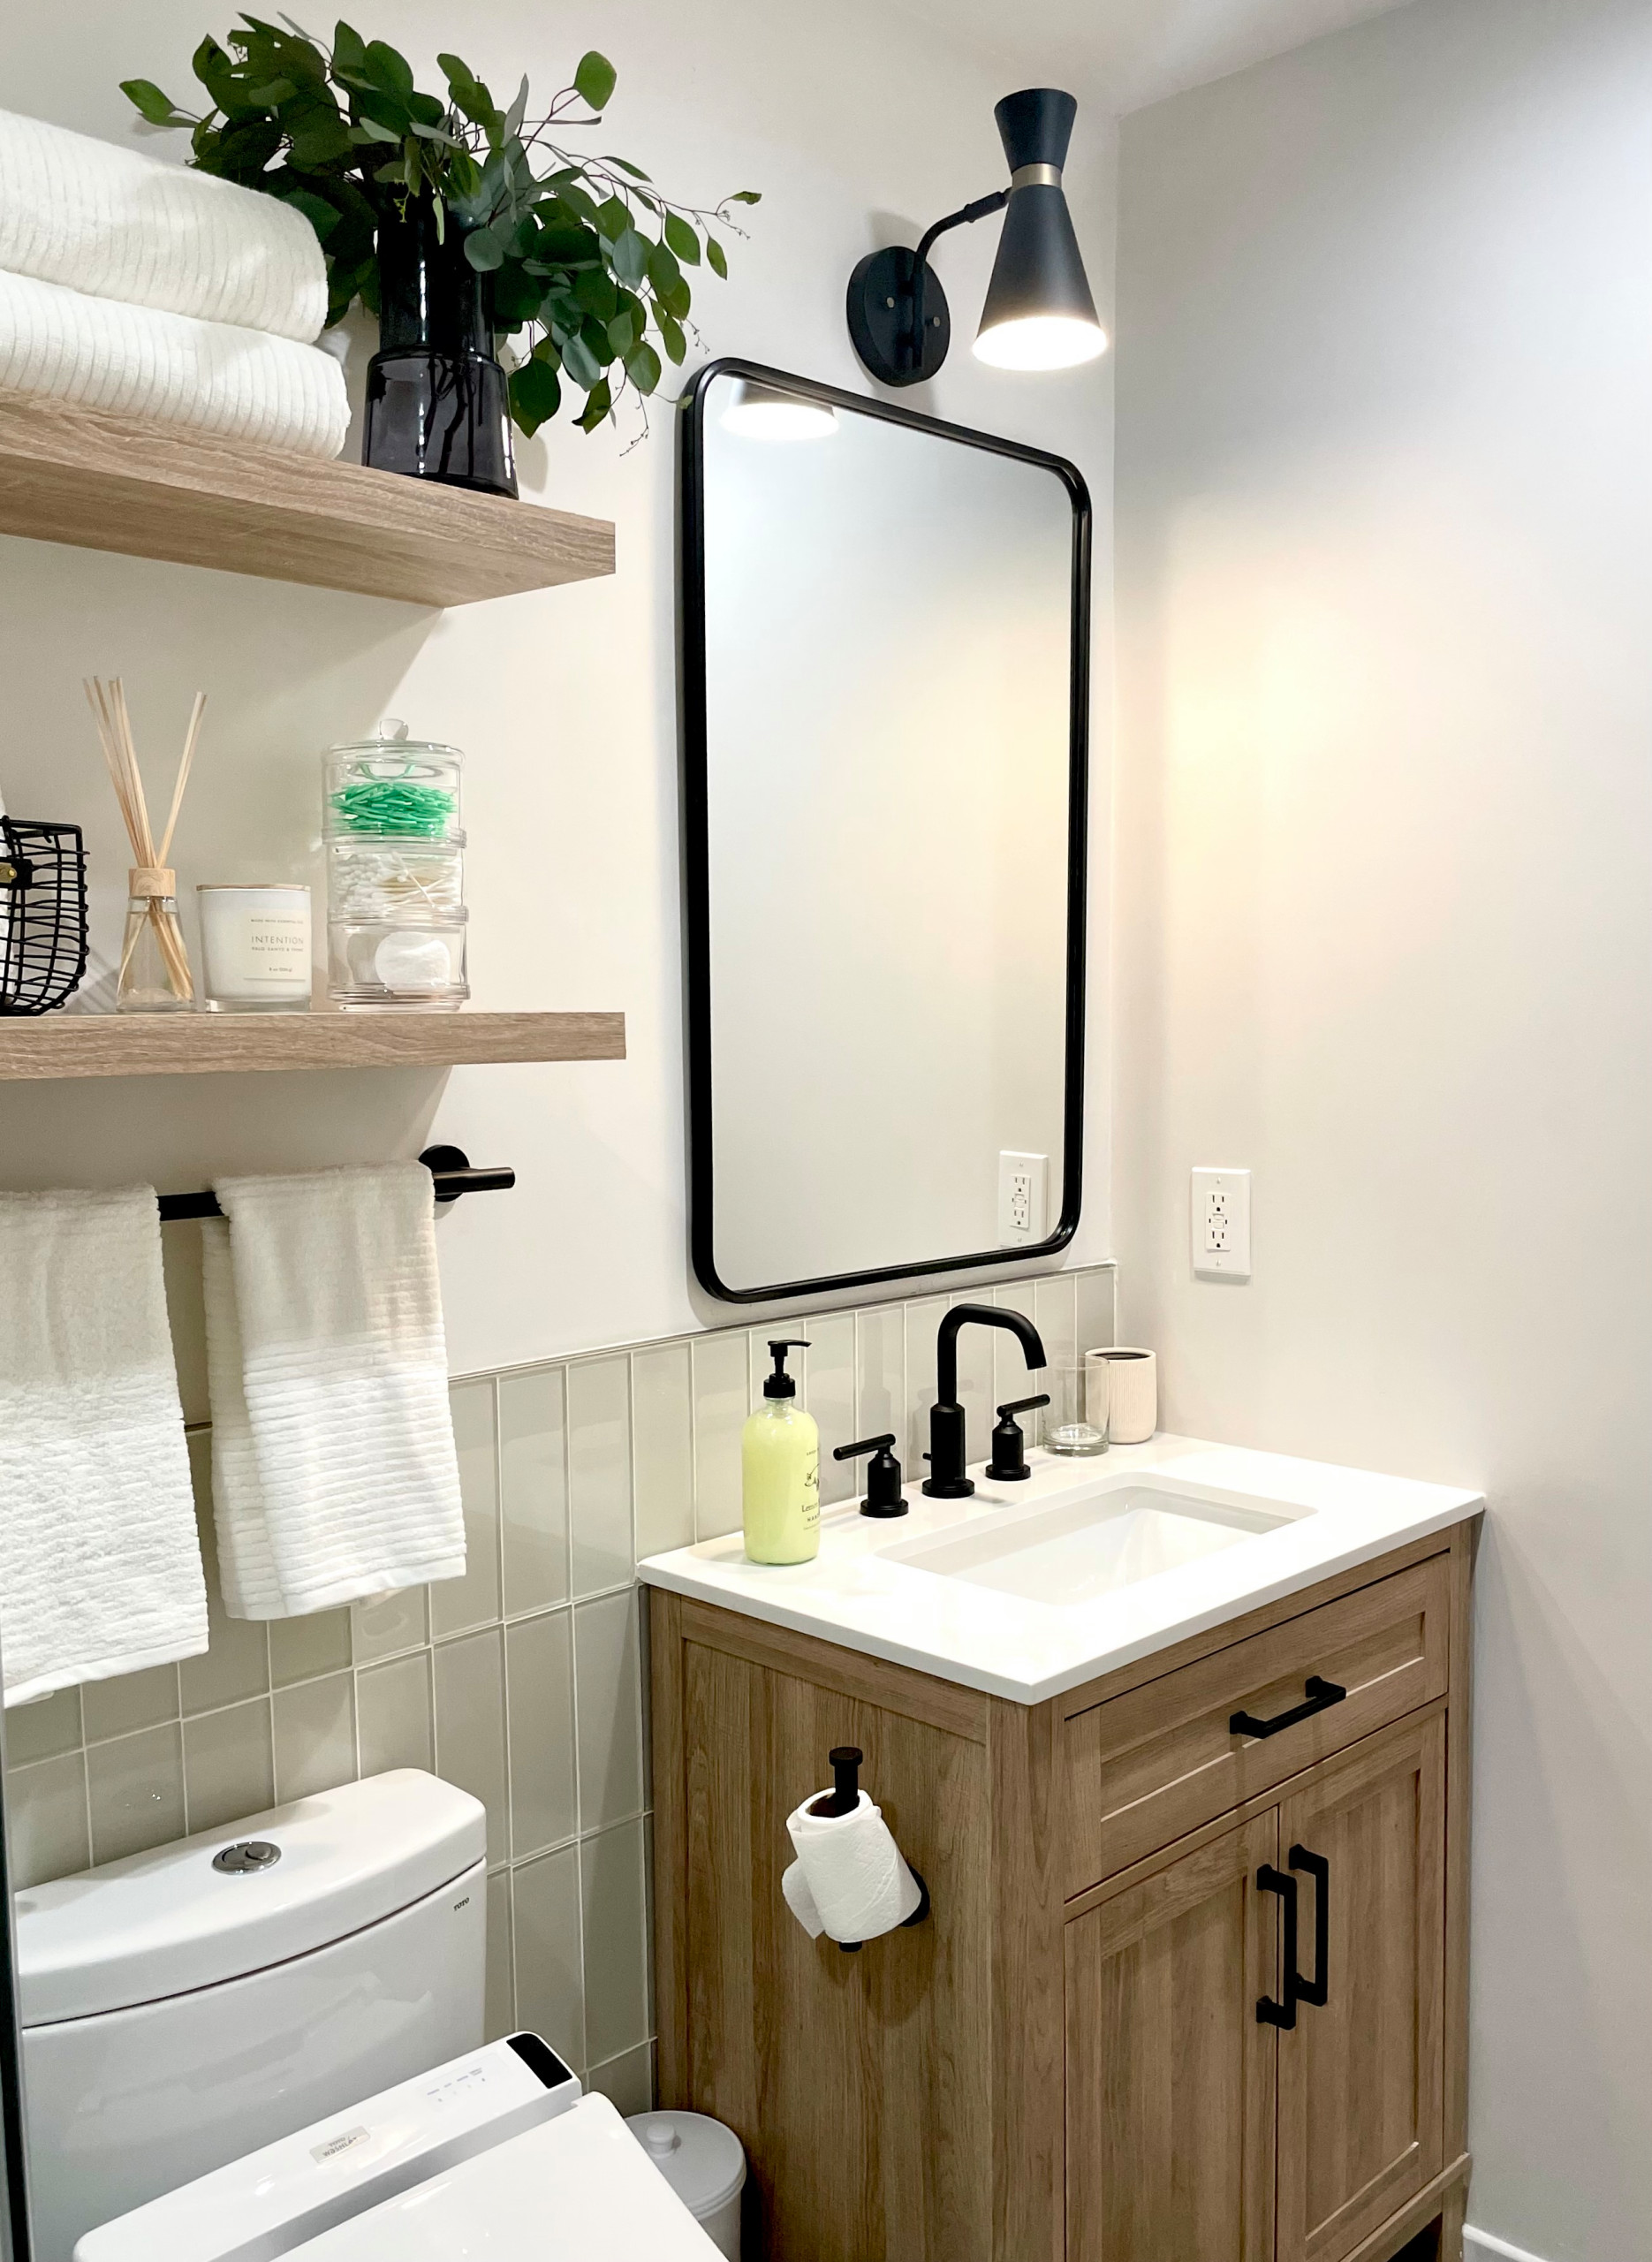 The new Guest Bathroom - Bright and modern with black and wood details